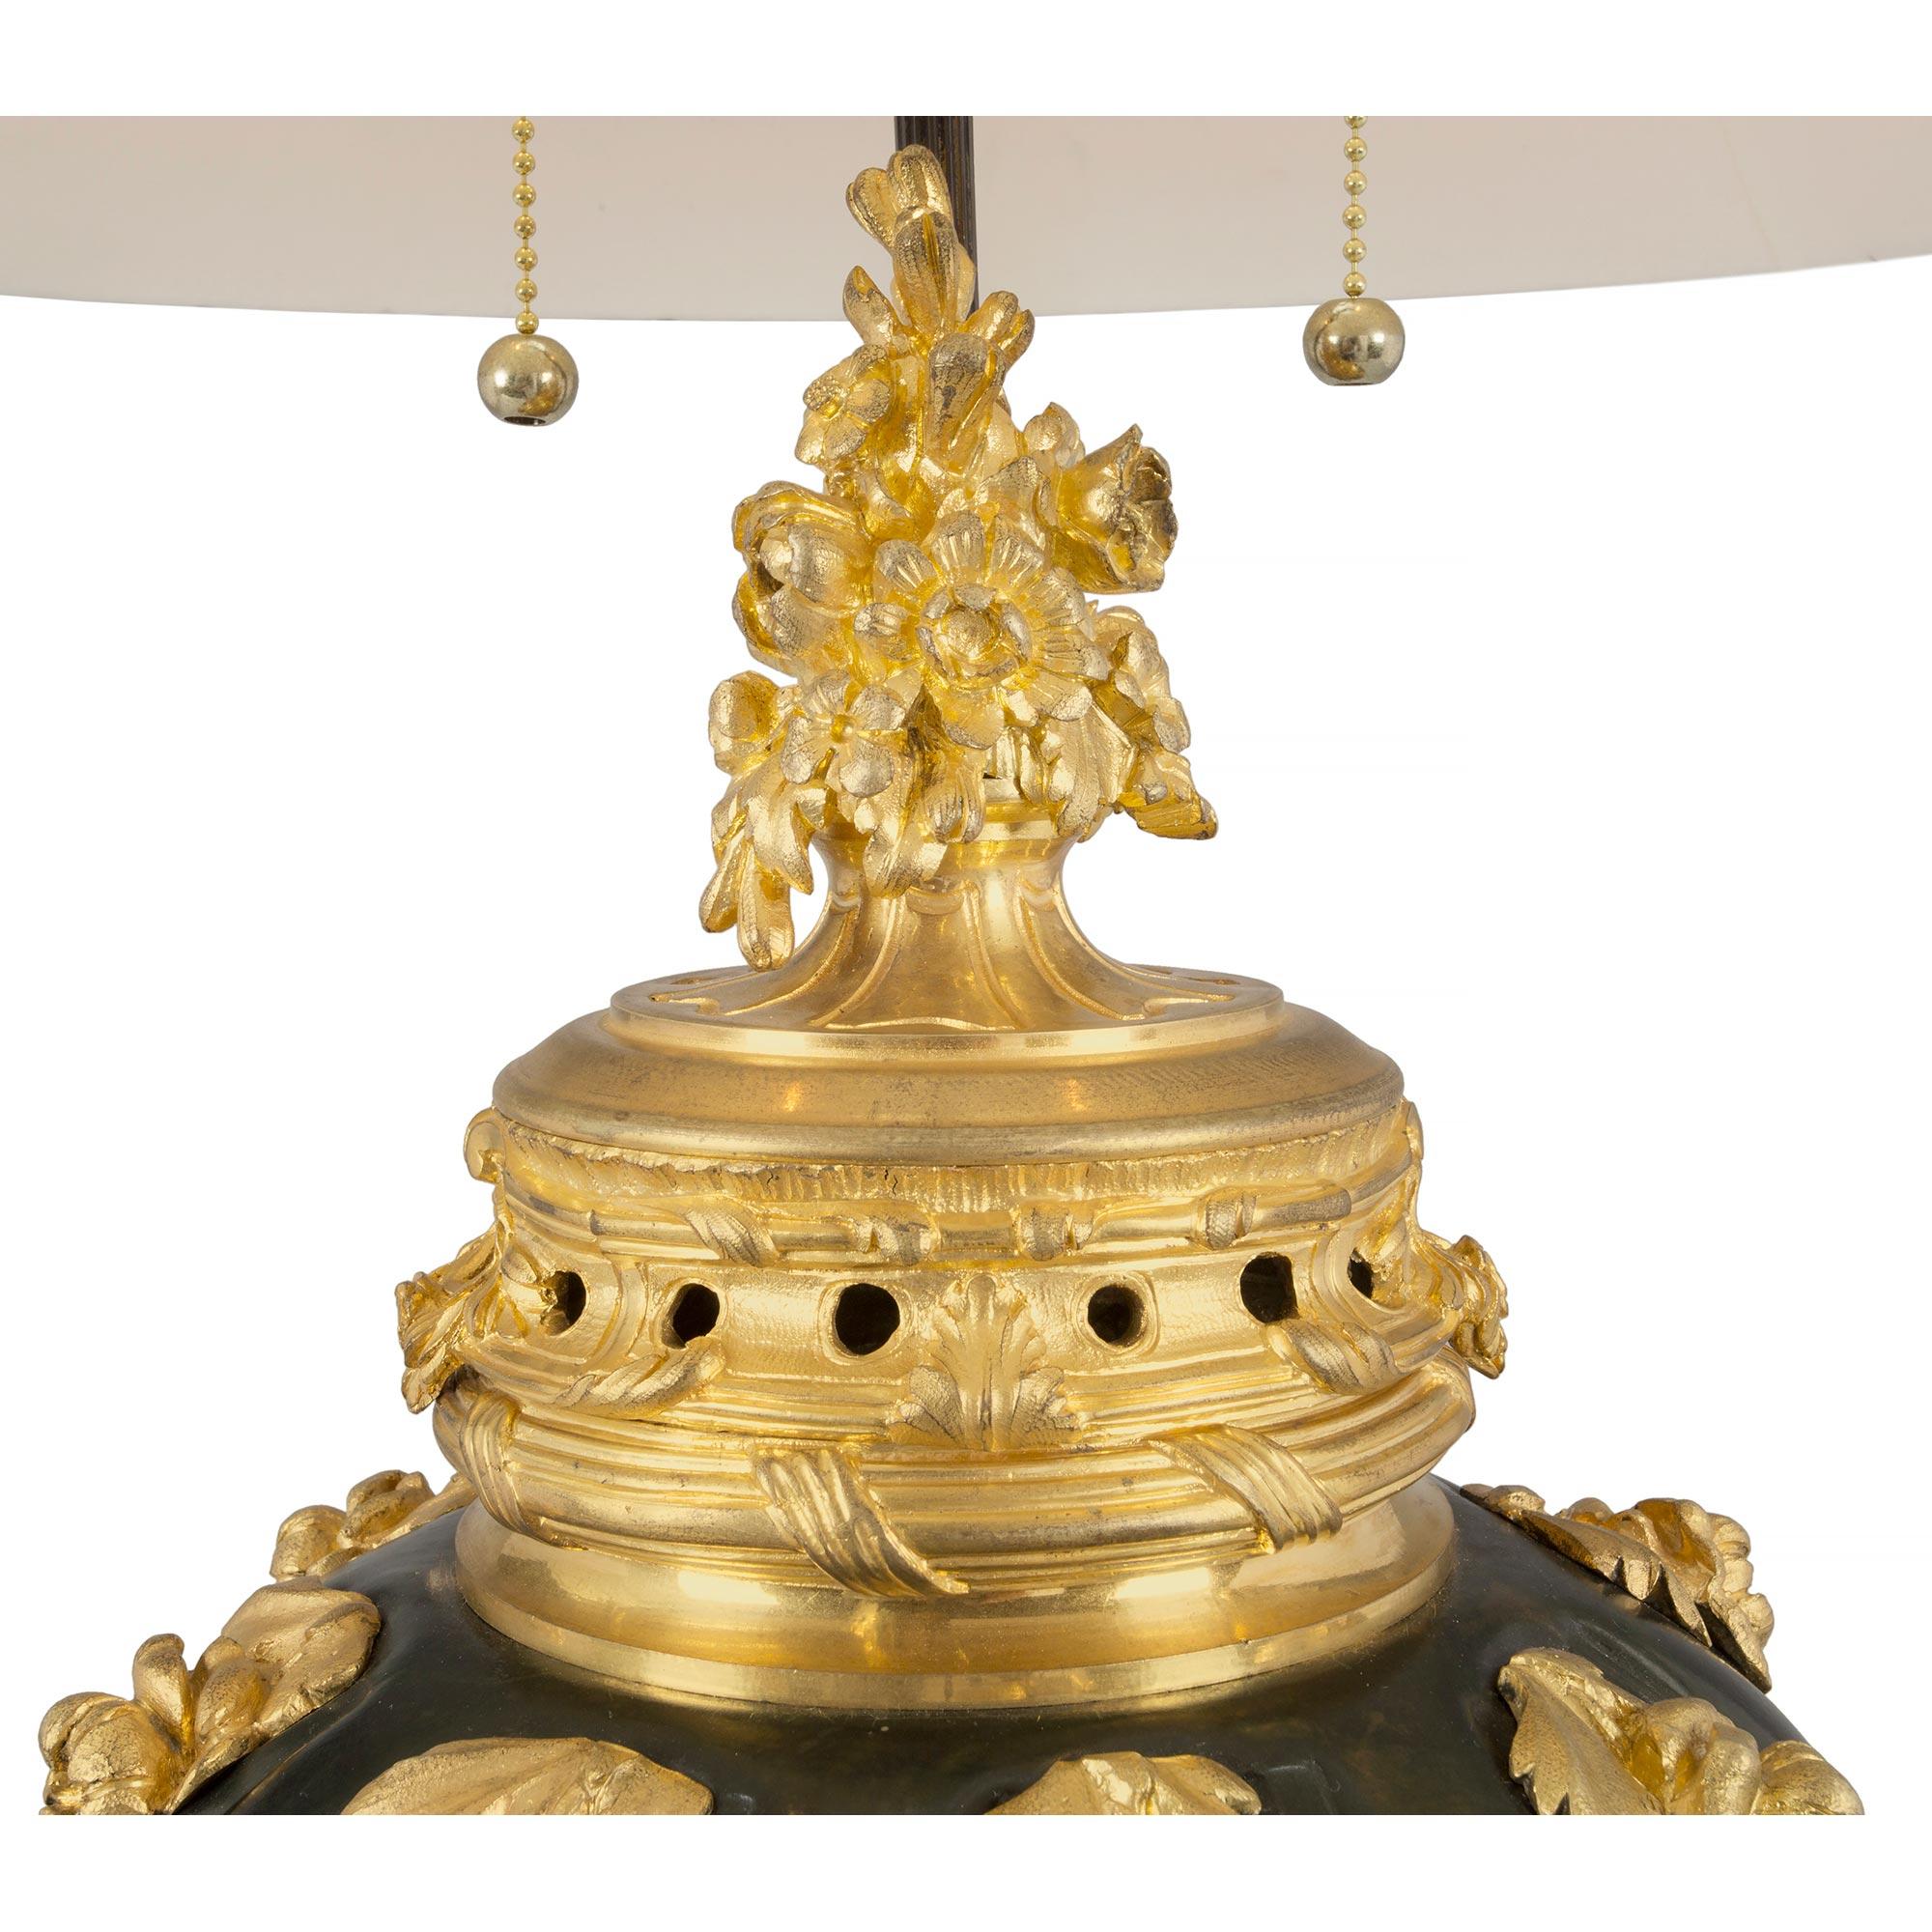 A striking French 19th century Louis XV st. patinated bronze and ormolu lamp. The lamp is raised by a richly chased rocaille designed ormolu base in a satin and burnished finish with foliate movements and cabochons. The patinated bronze body